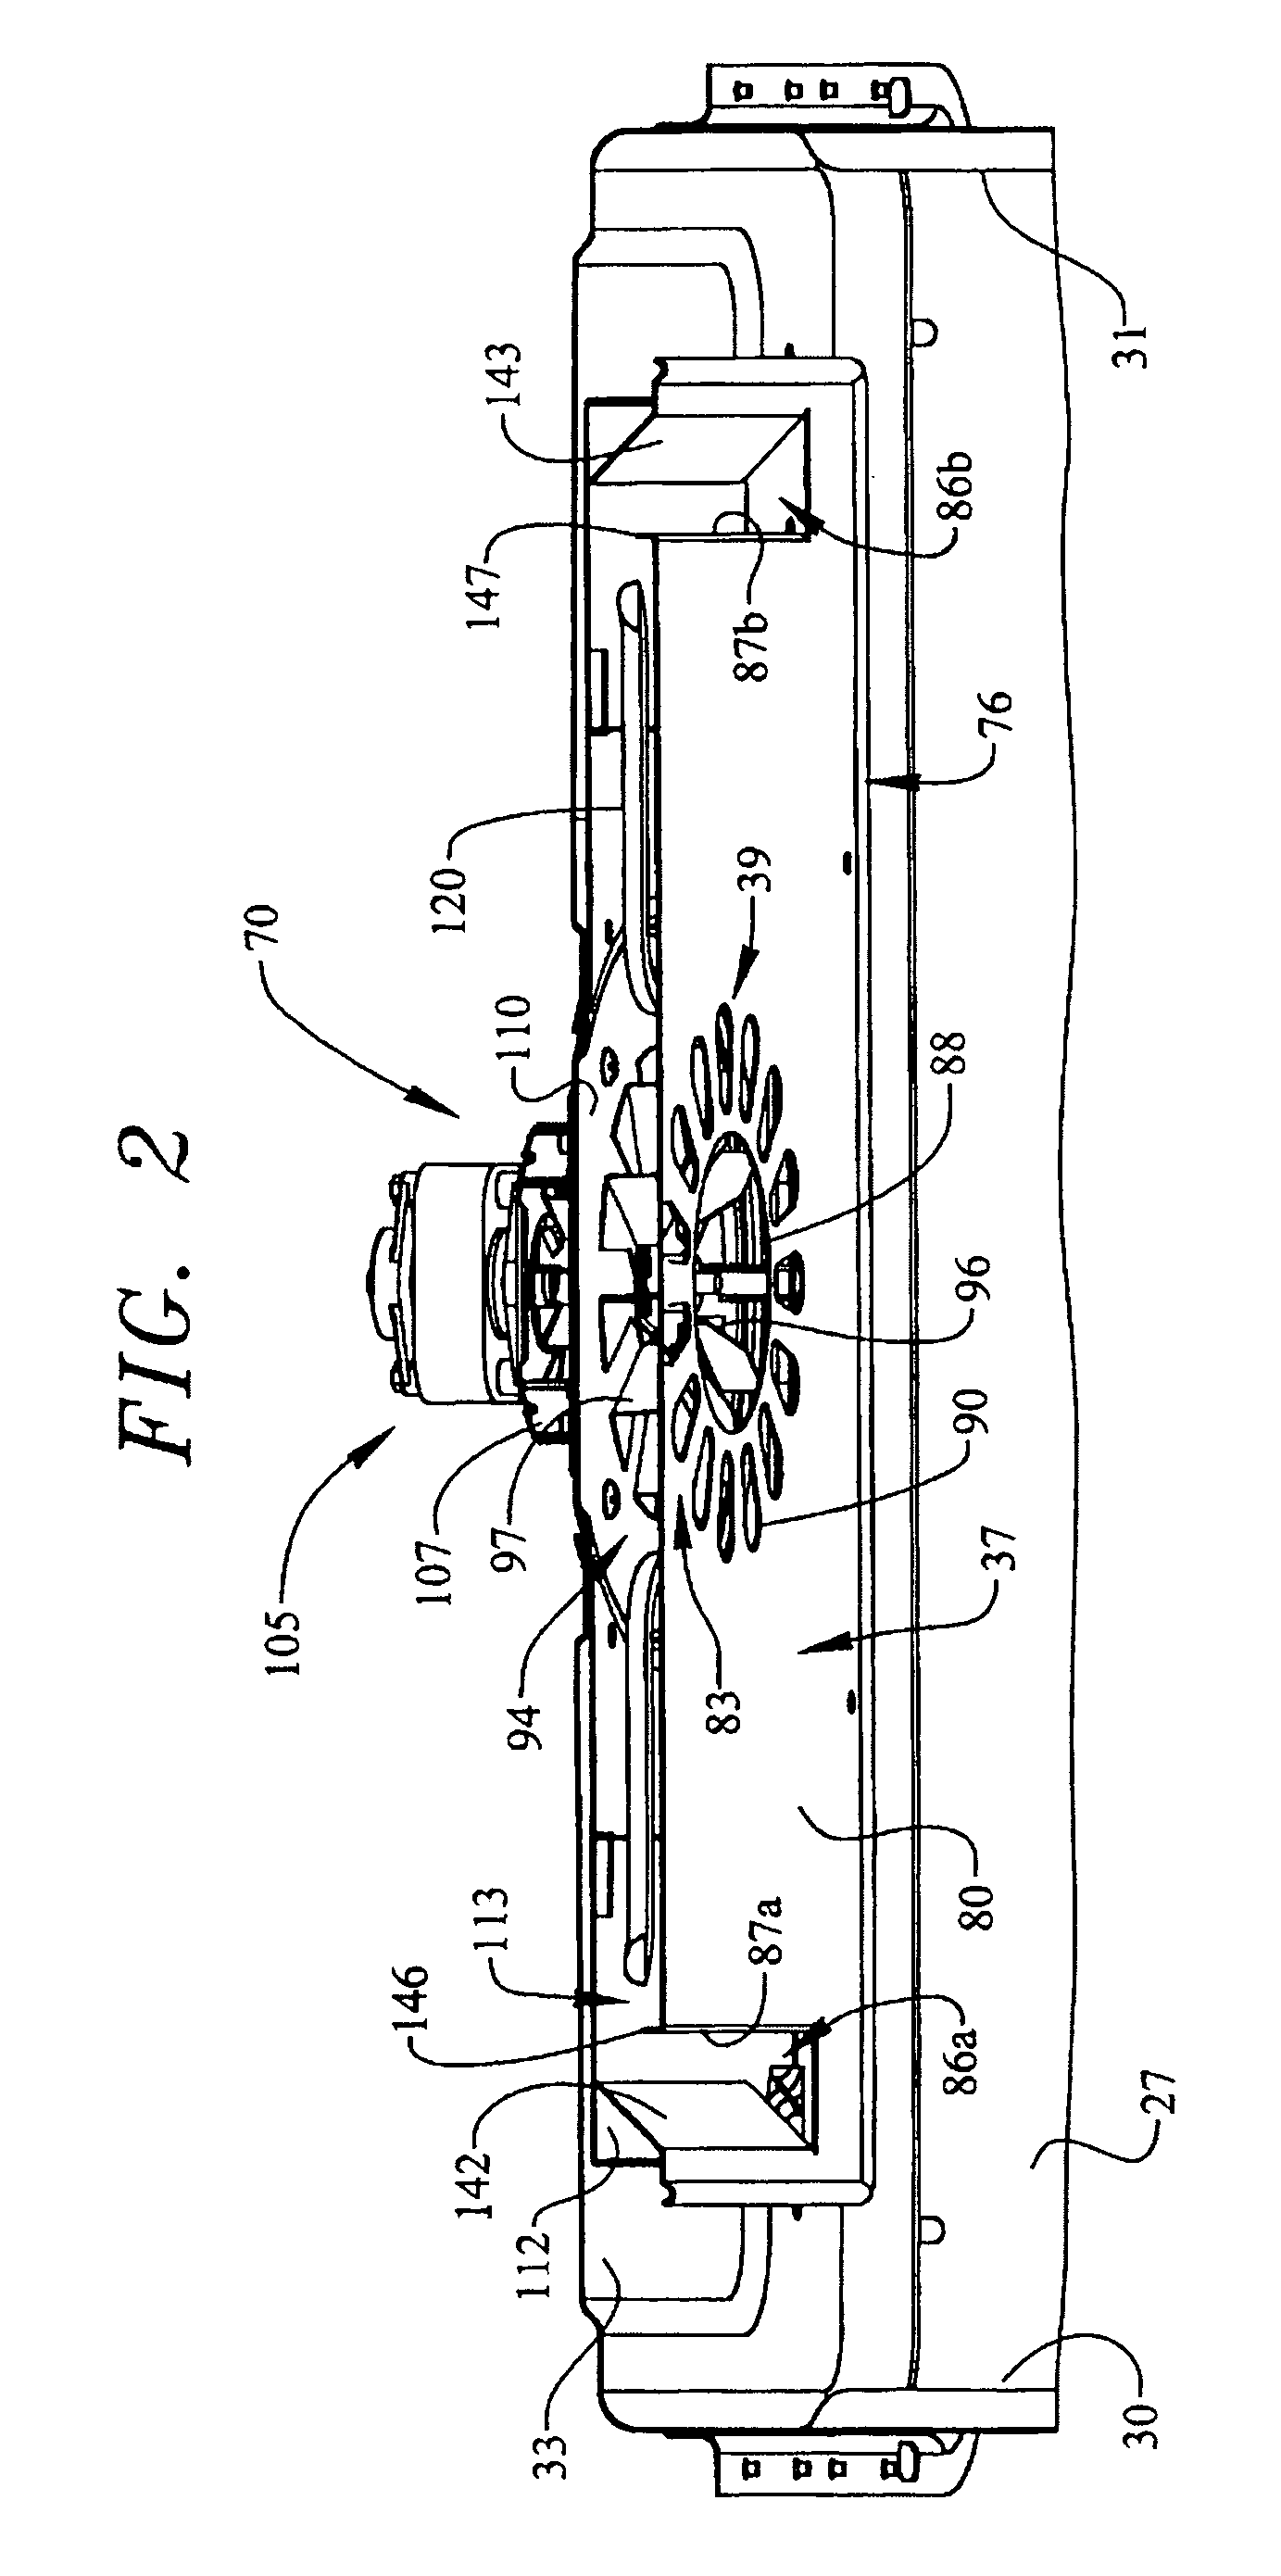 Airflow system for a convection oven